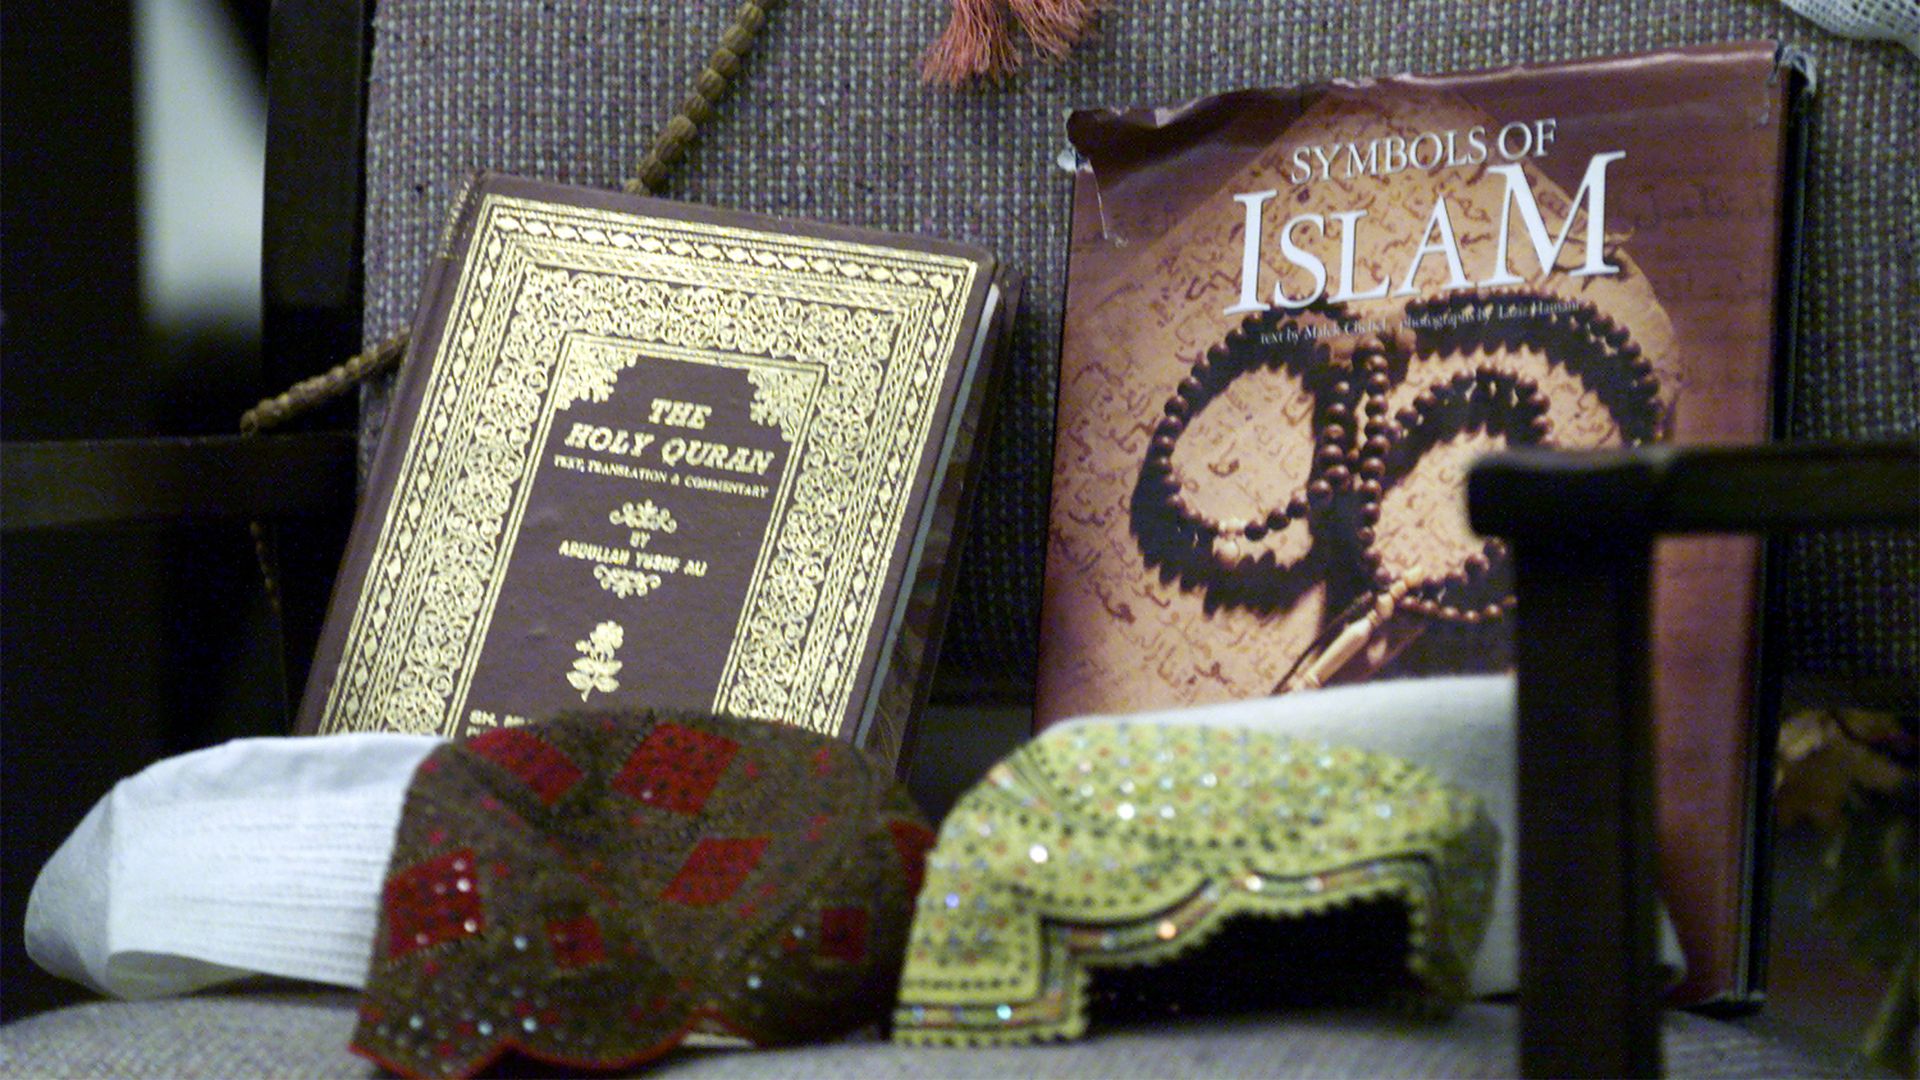 Photo of a copy of the Quran sitting on a chair next to a book titled "Symbols of Islam"